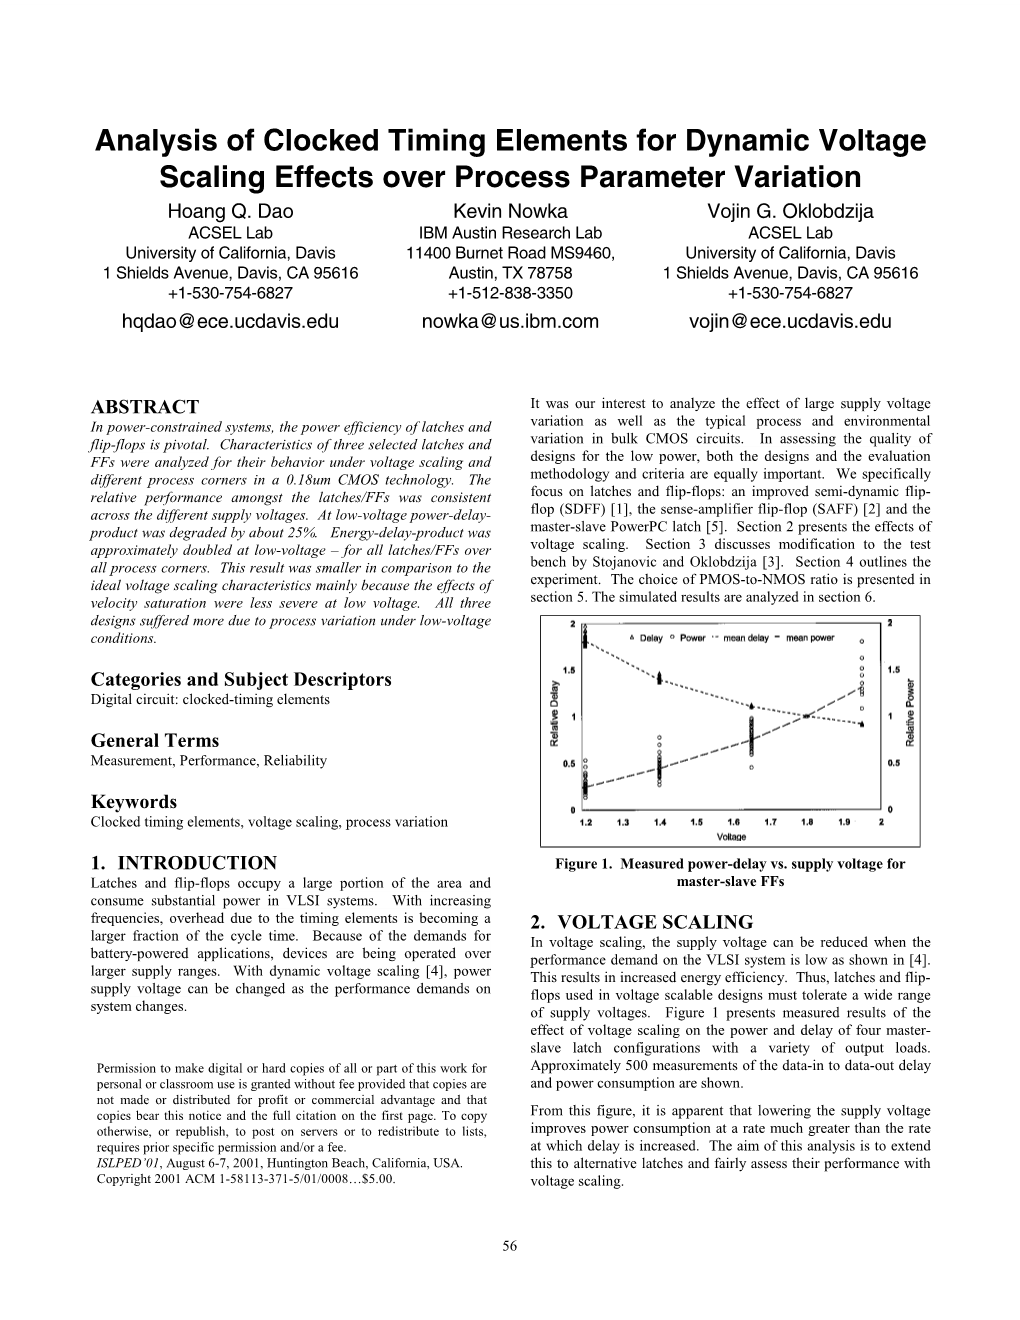 Analysis of Clocked Timing Elements for Dynamic Voltage Scaling Effects Over Process Parameter Variation Hoang Q